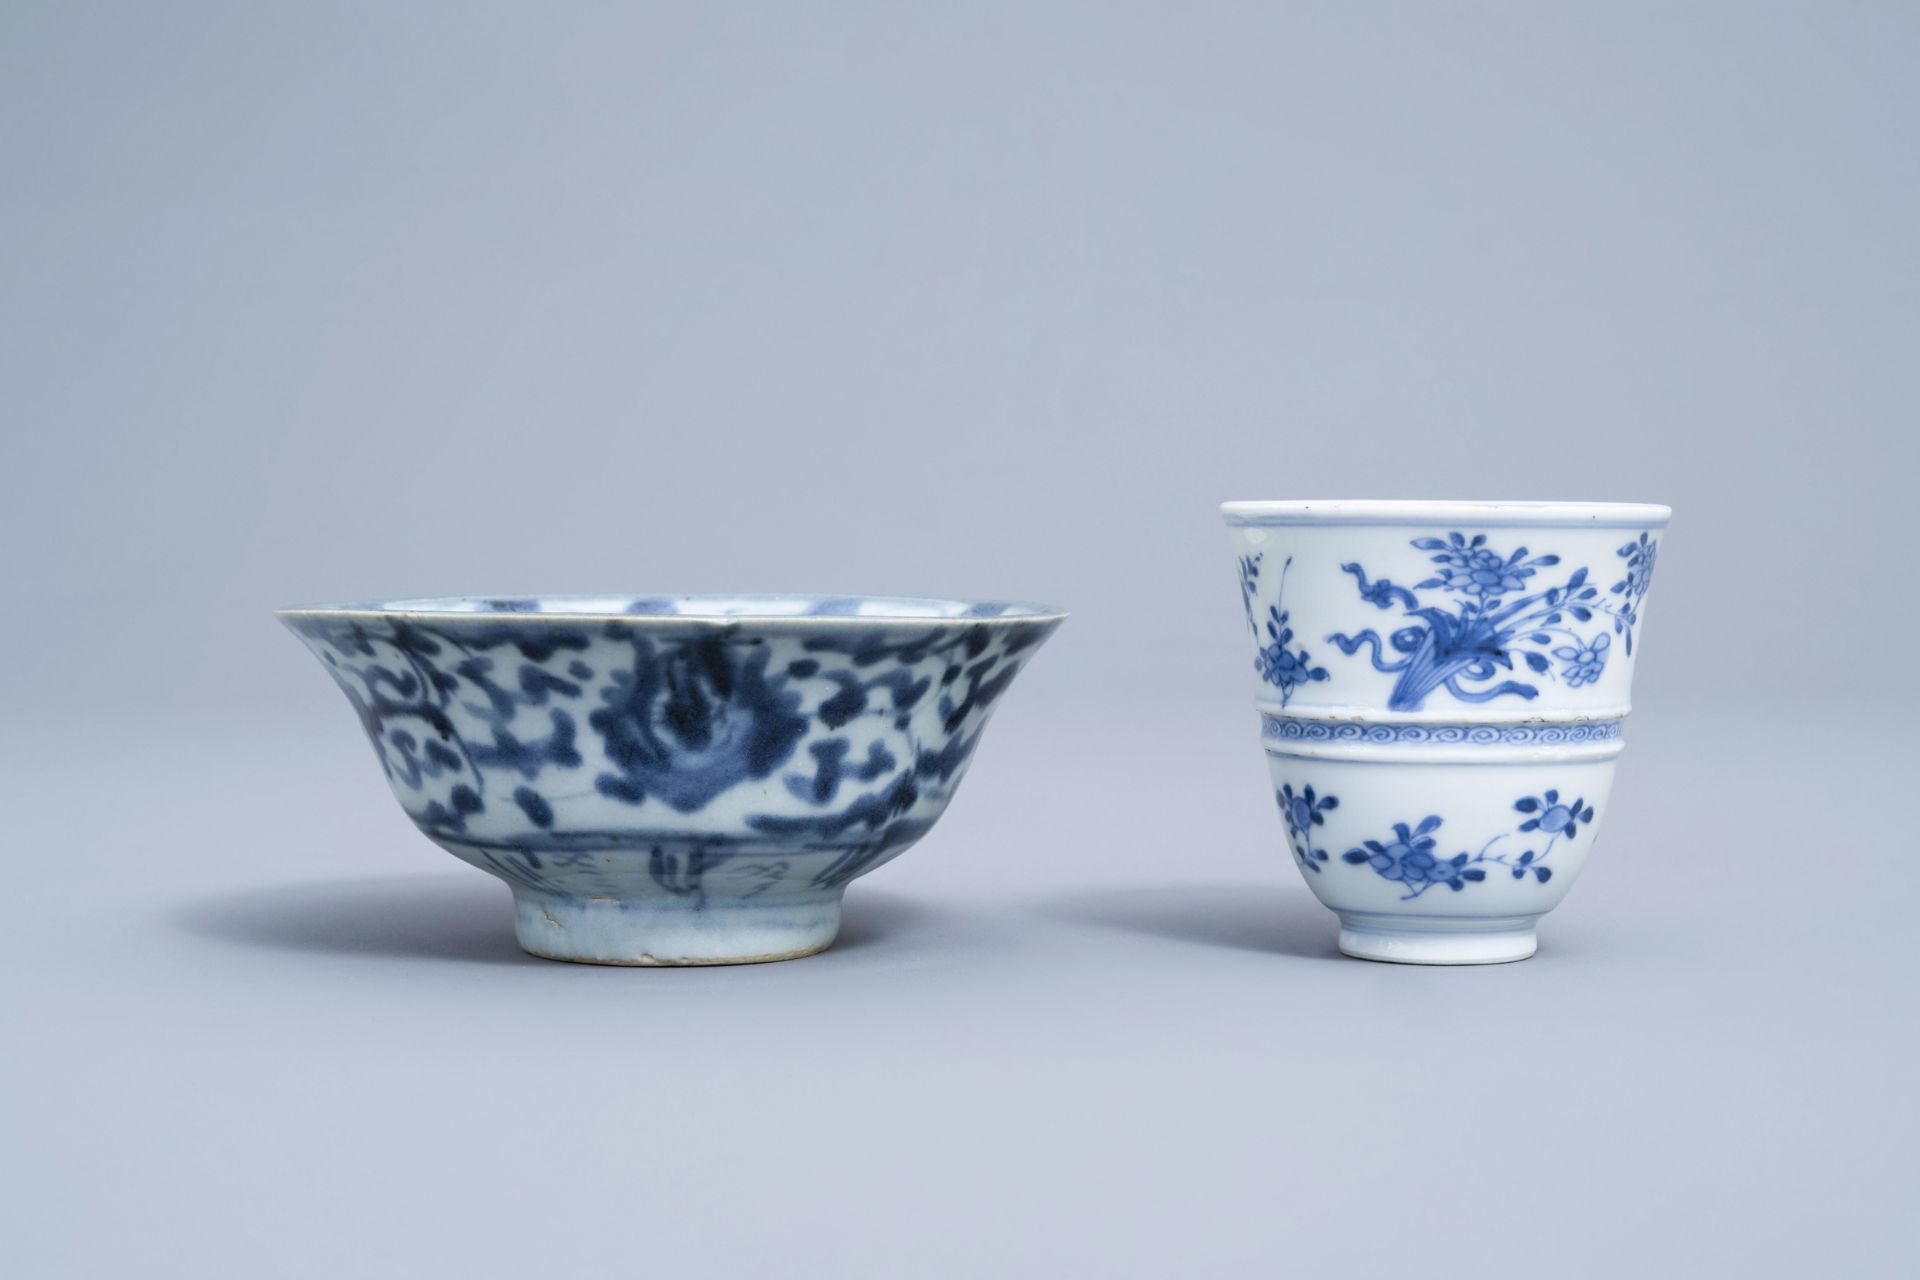 A varied collection of Chinese blue and white porcelain, 18th C. and later - Image 19 of 54